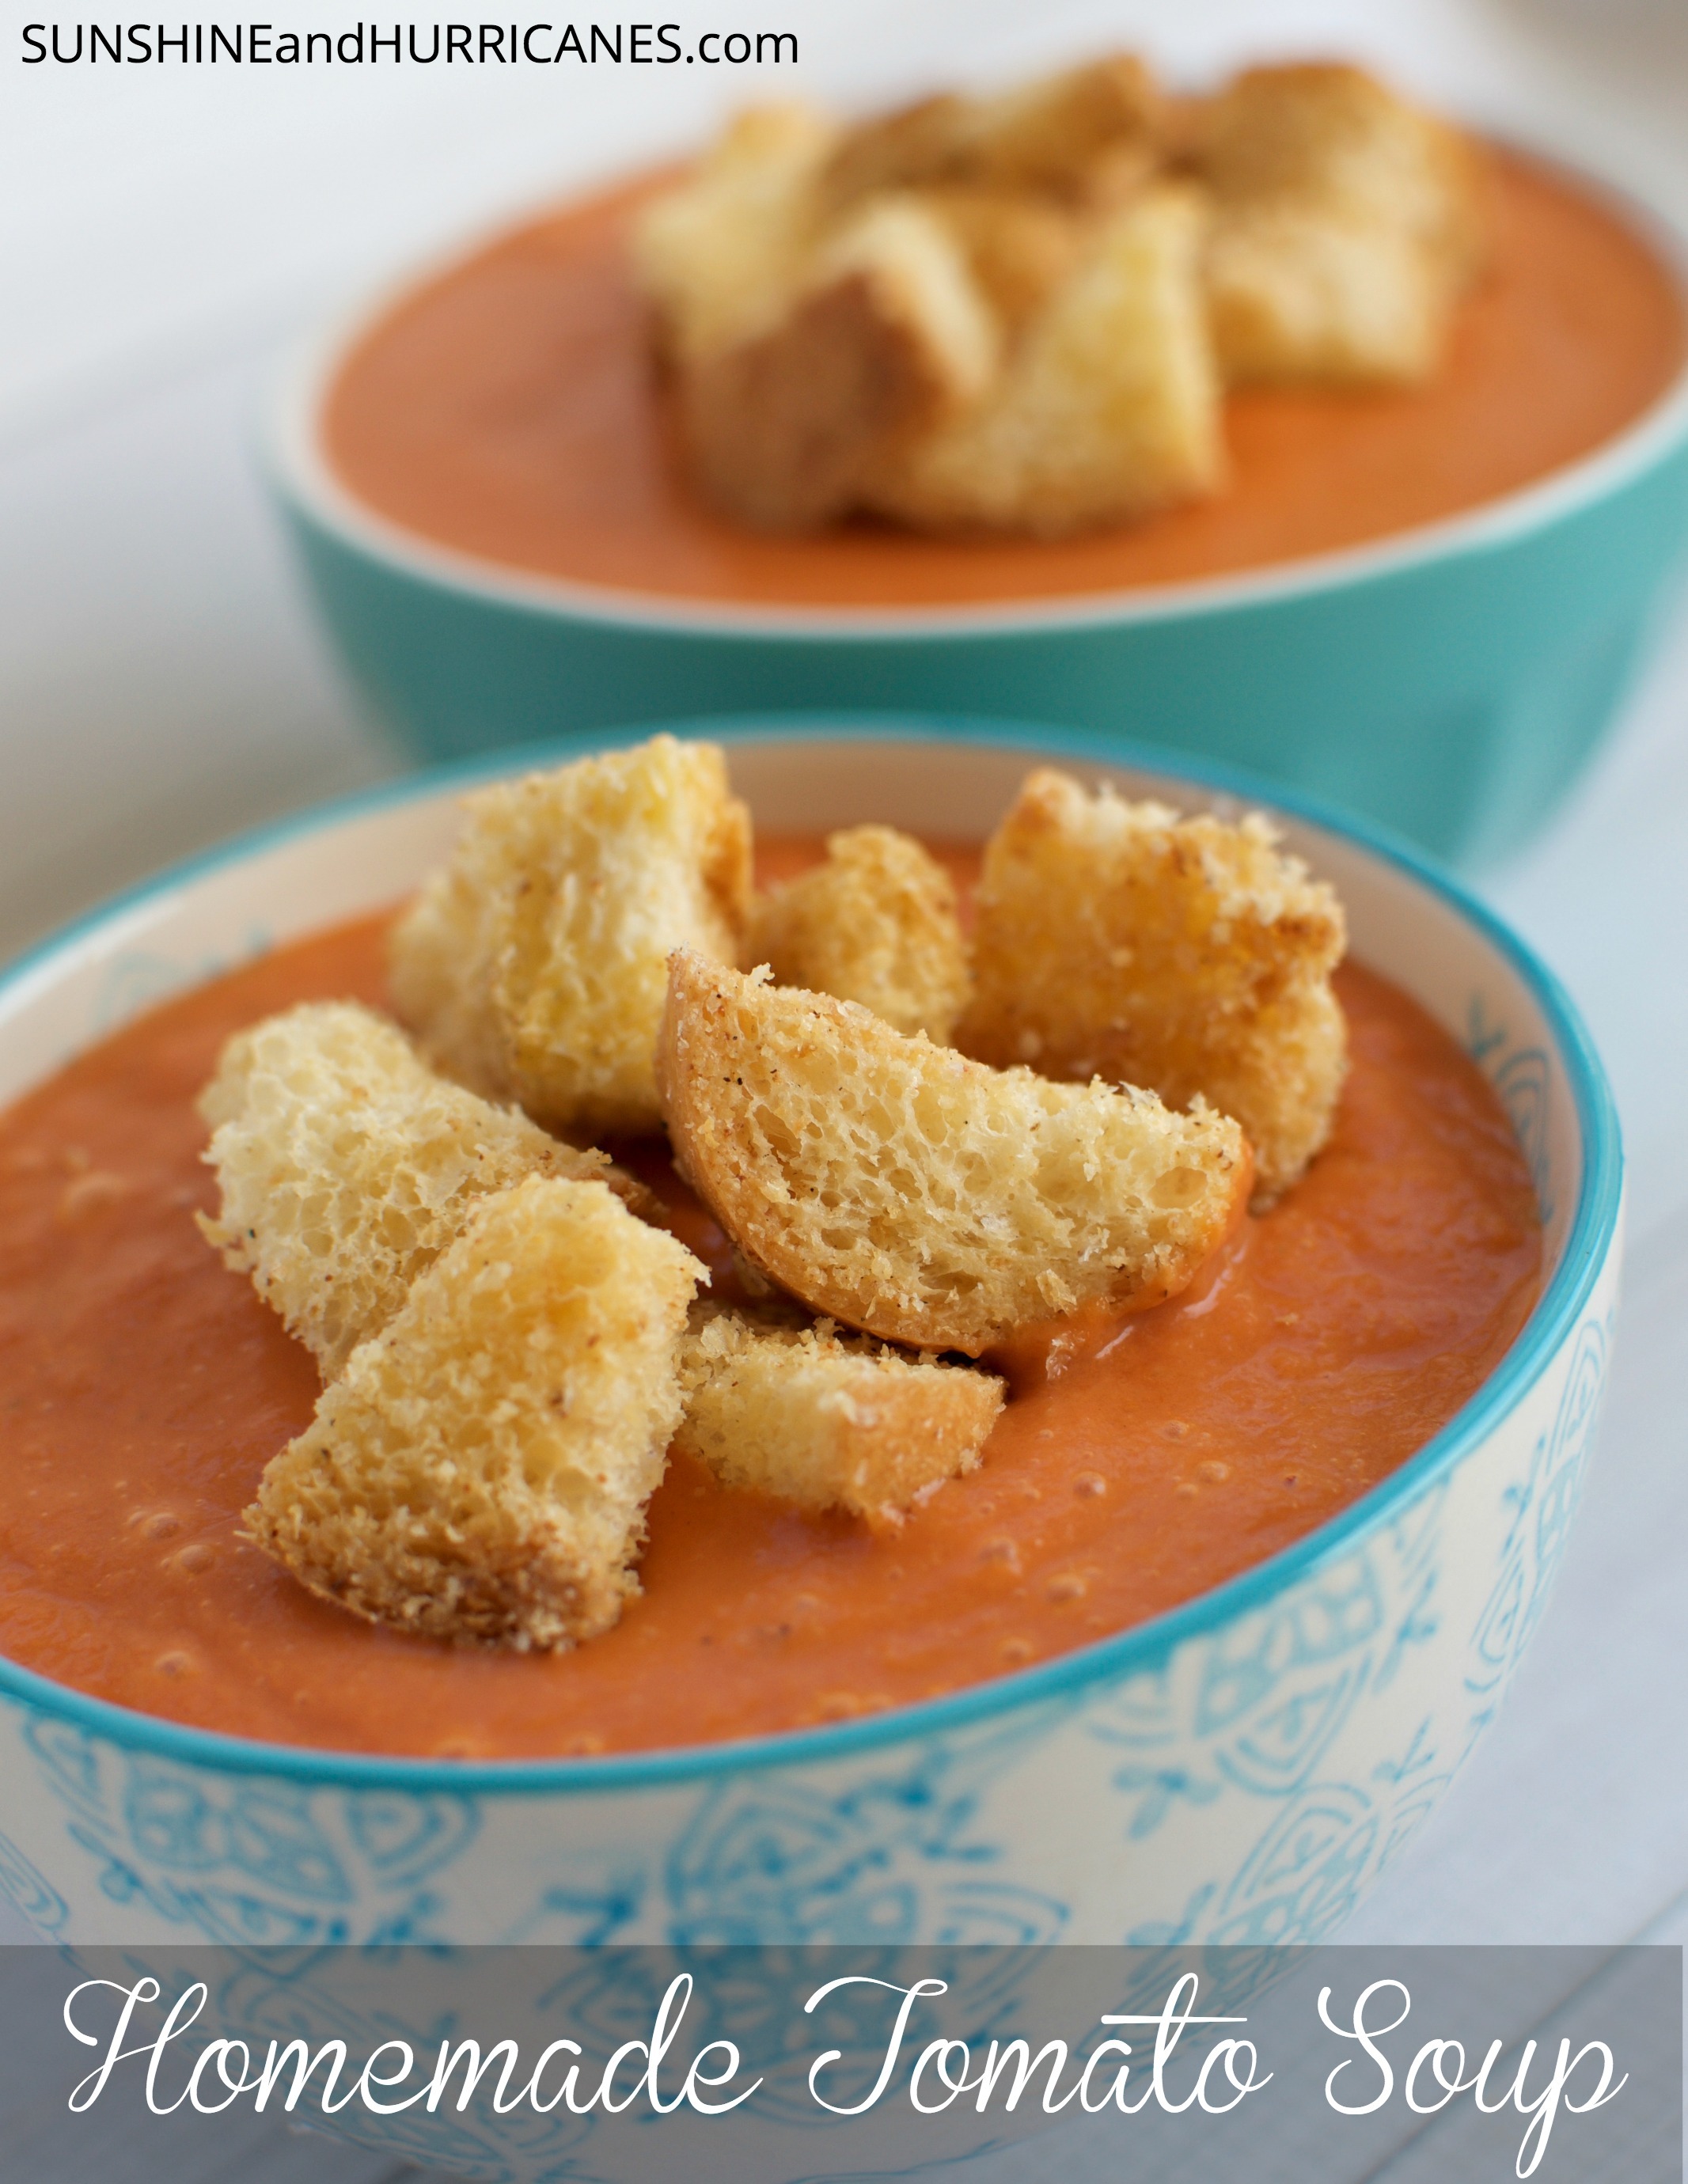 Delicious and savory, this homemade tomato soup with brown butter croutons is one of the best things you'll eat! This recipe is easy and sure to be a hit with the entire family, even the kids will ask for seconds! This is perfect comfort food or a meal for a new mom. Freezes well and so simple, even beginning cooks can make it!